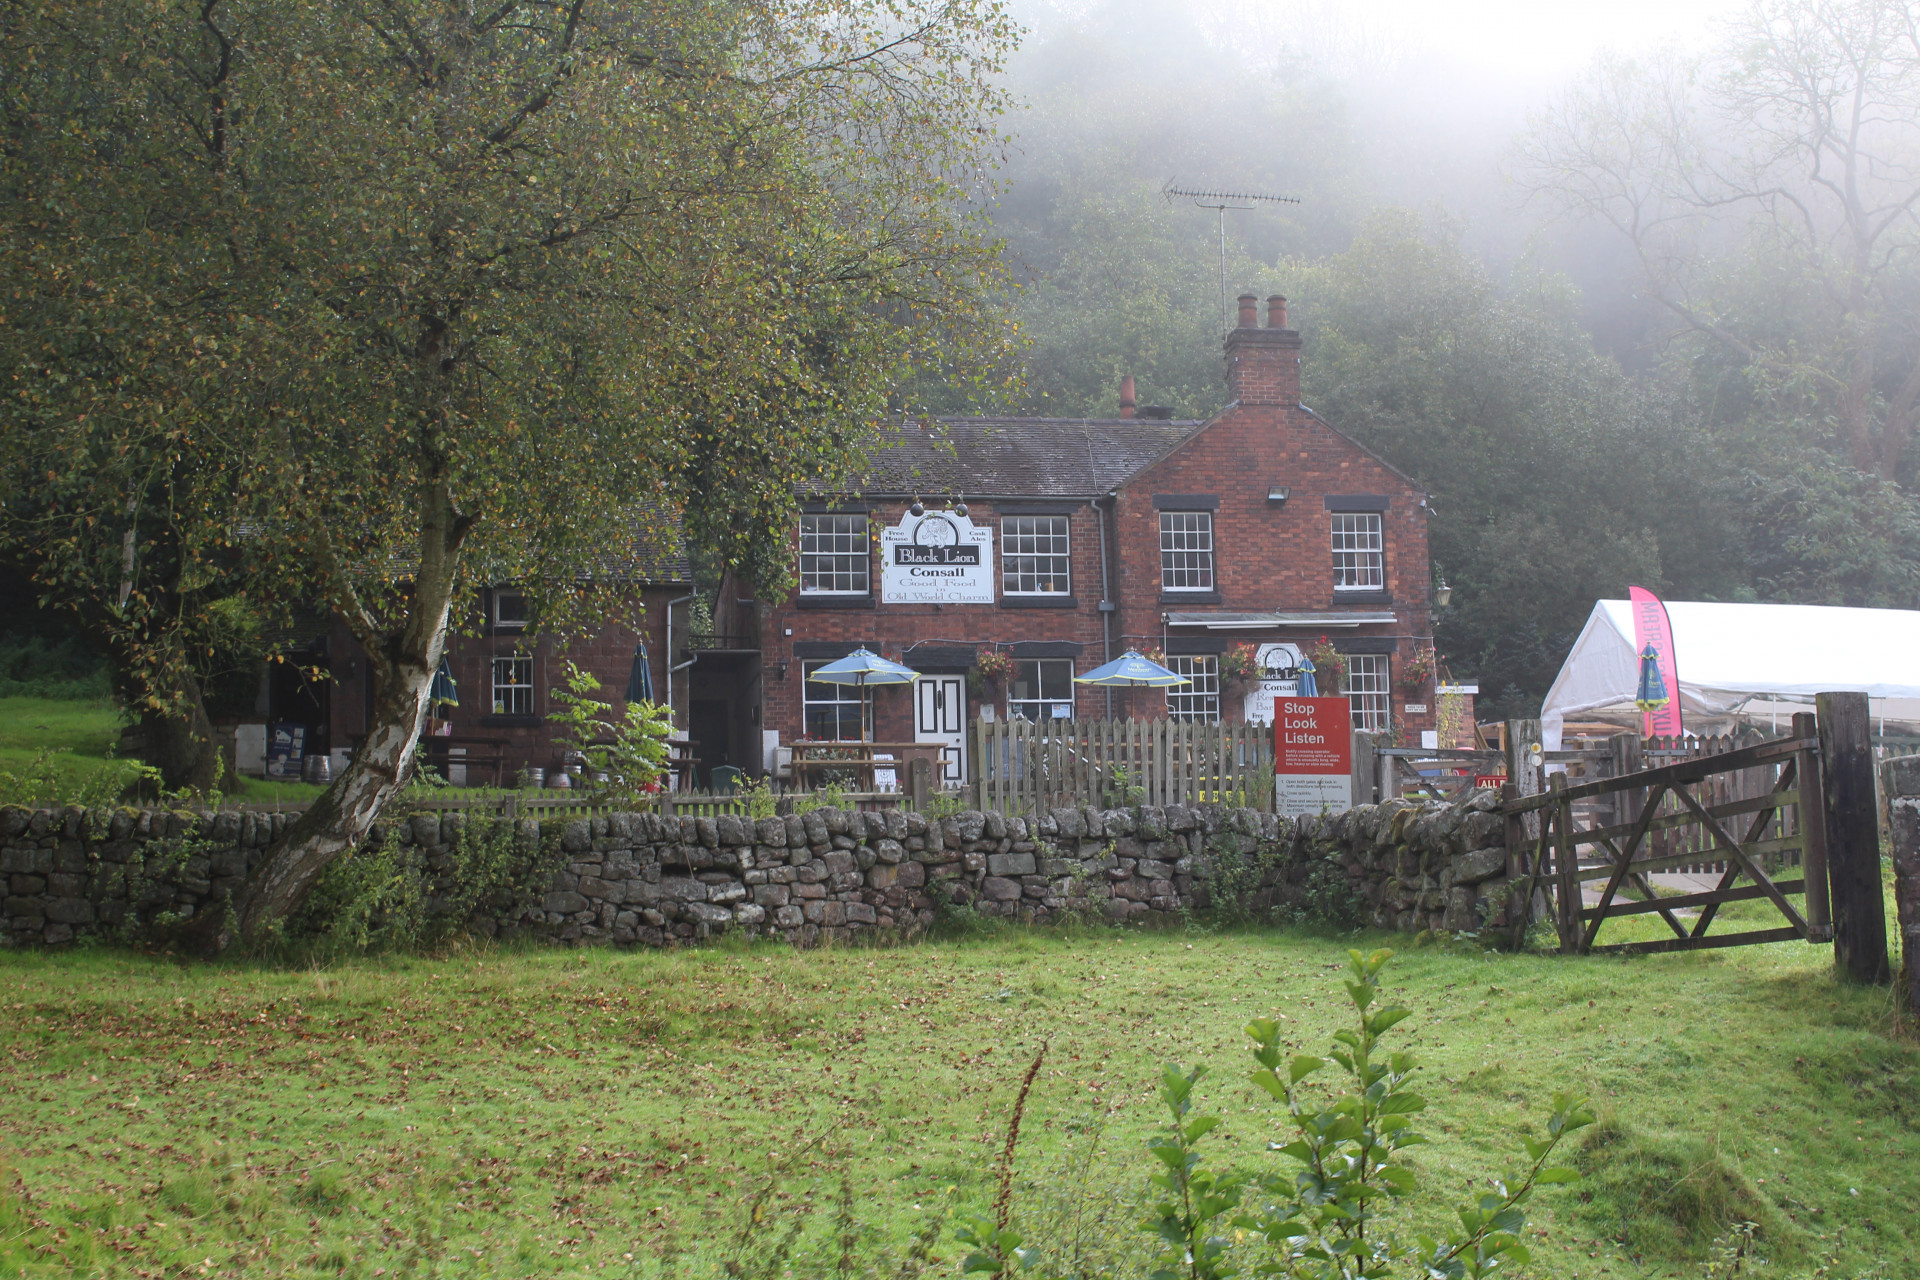 The Black Lion, Consall Forge